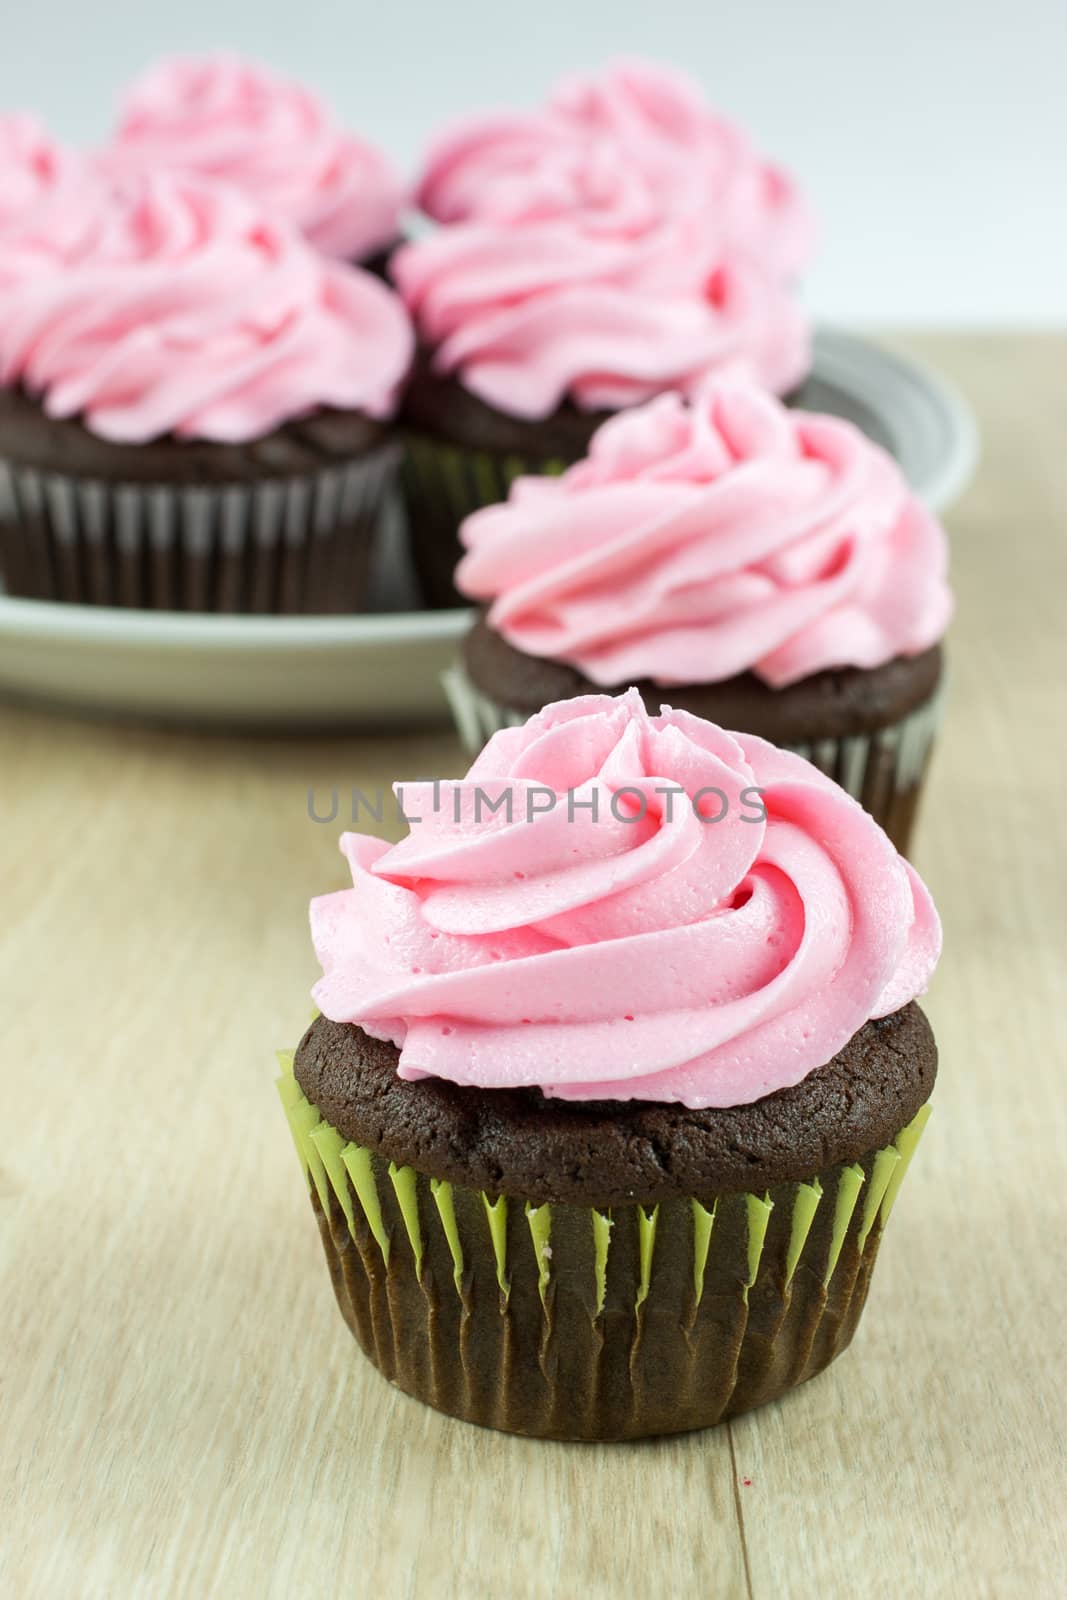 Chocolate Cupcakes with pink icing by SouthernLightStudios